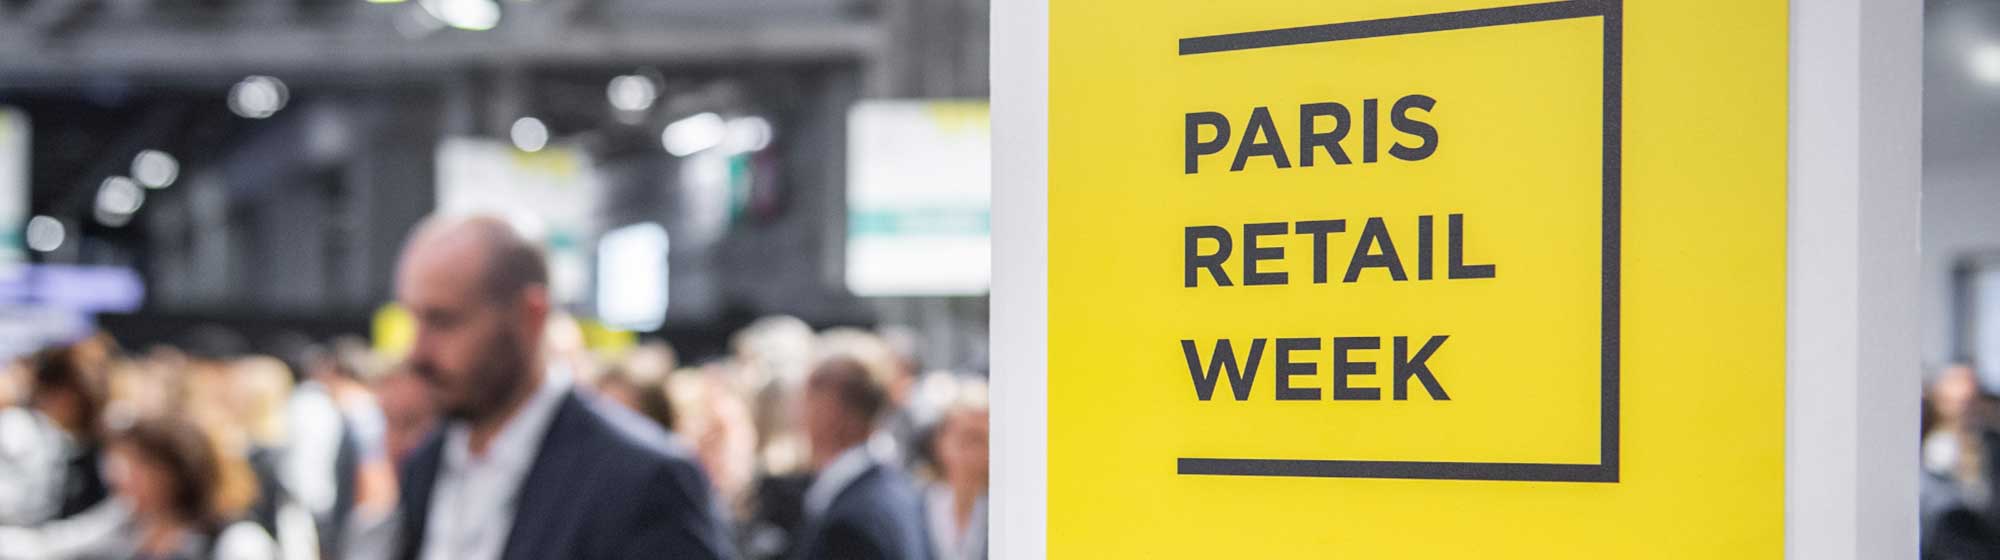 Crowd of visitors behind a sign with Paris retail Week on it